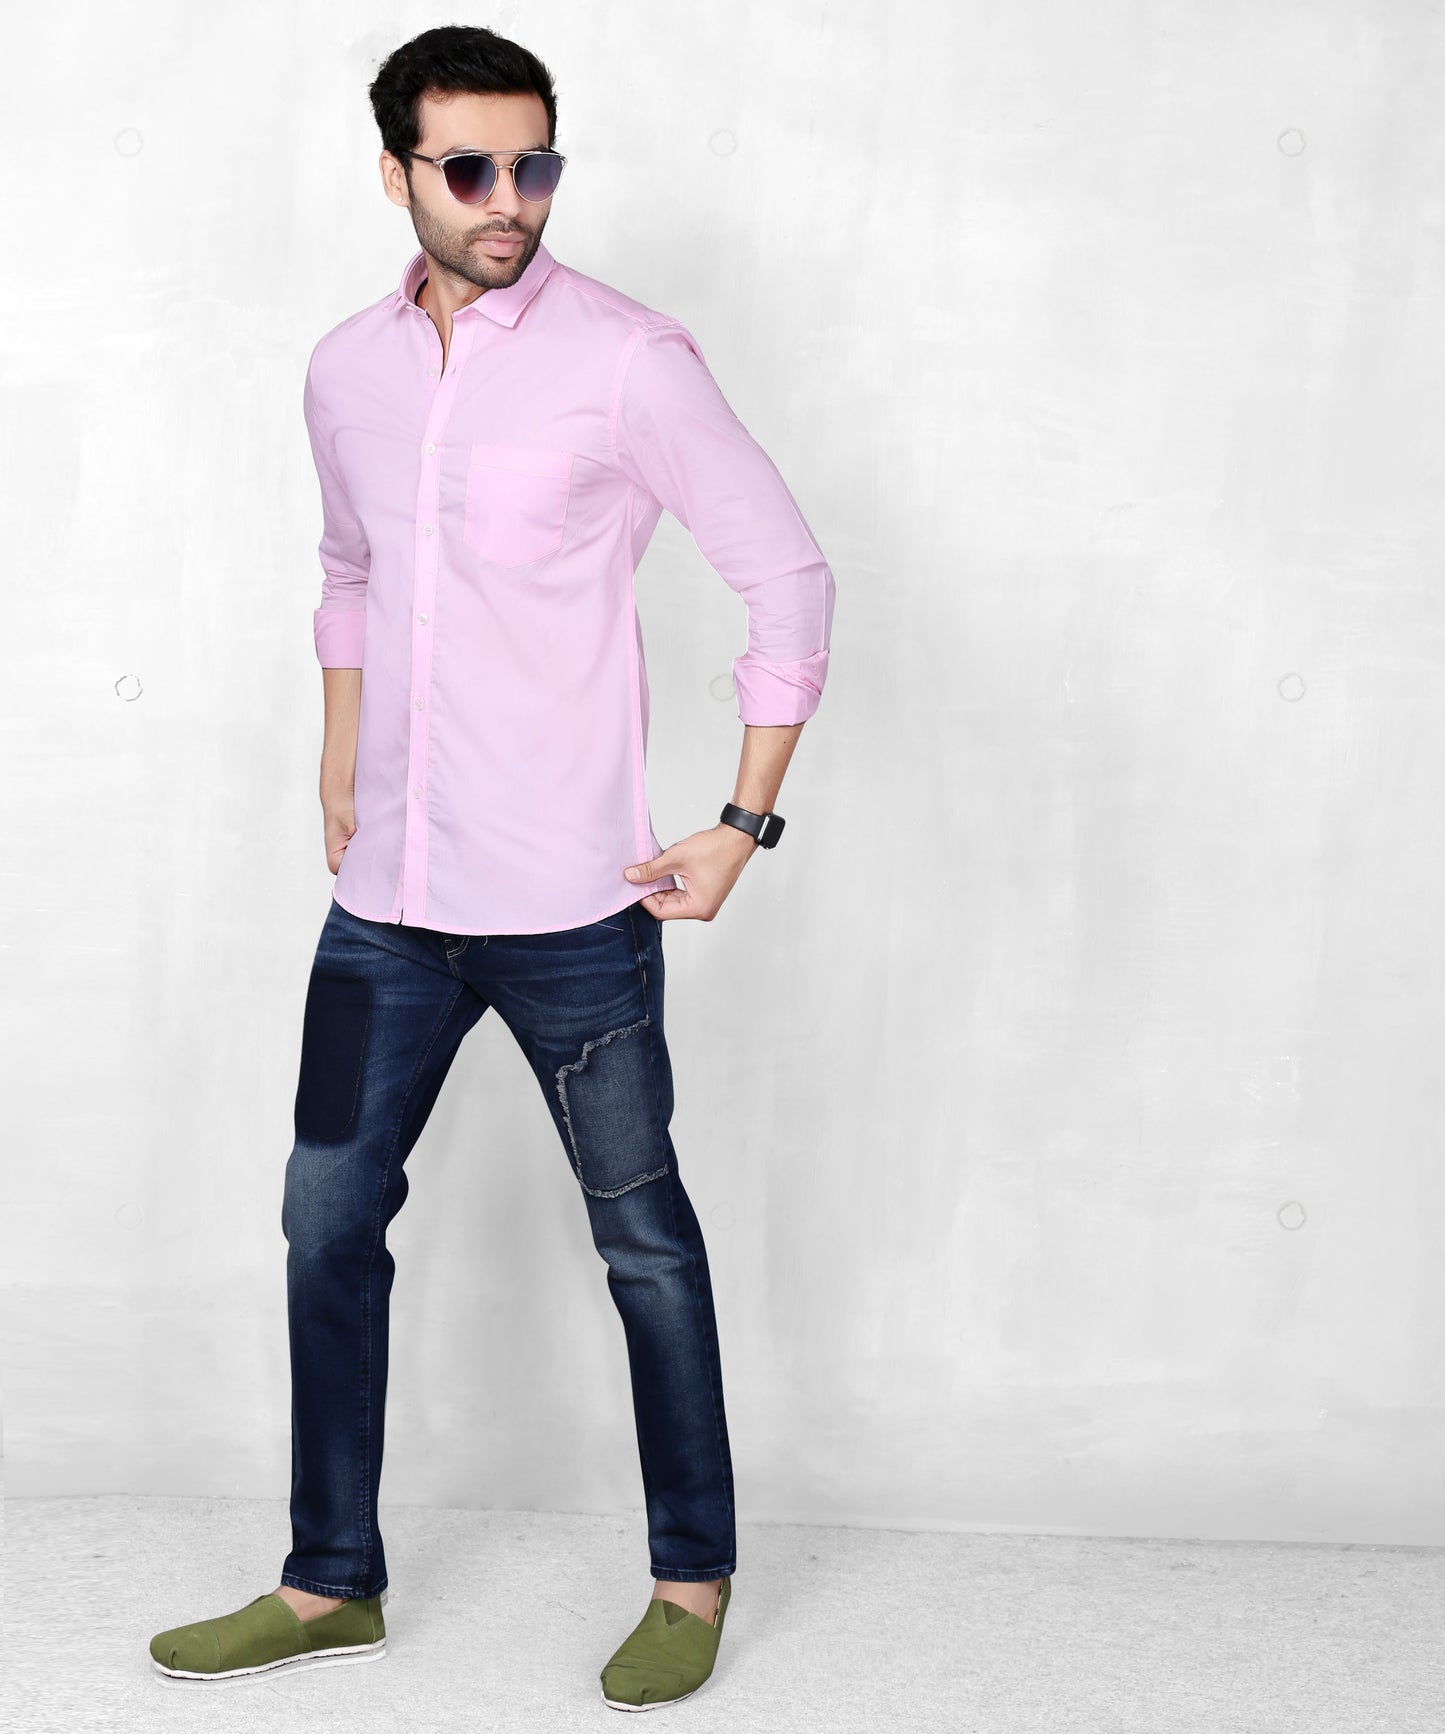 5thanfold Men's Casual Pure Cotton Full Sleeve Solid Pink Slim Fit Shirt